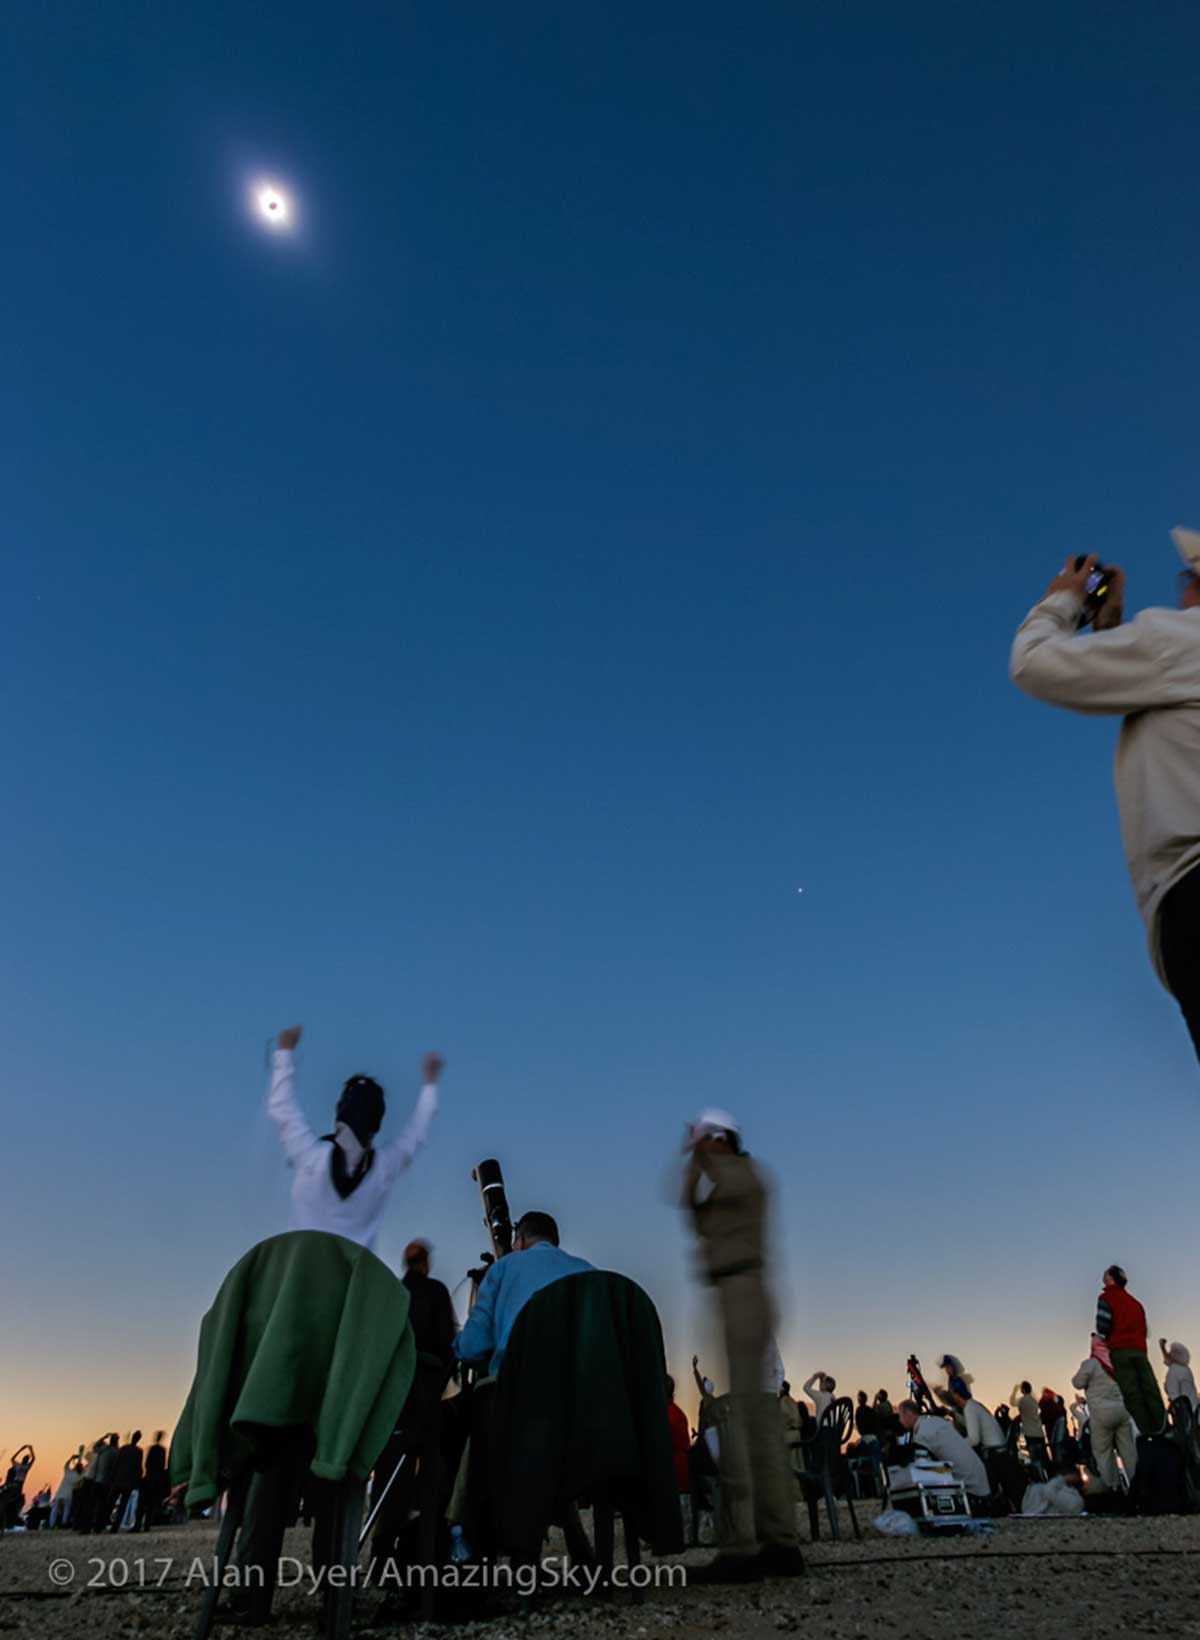 Wide angle photo (10 mm) of eclipse, Libya, 2006 by Alan Dyer ©